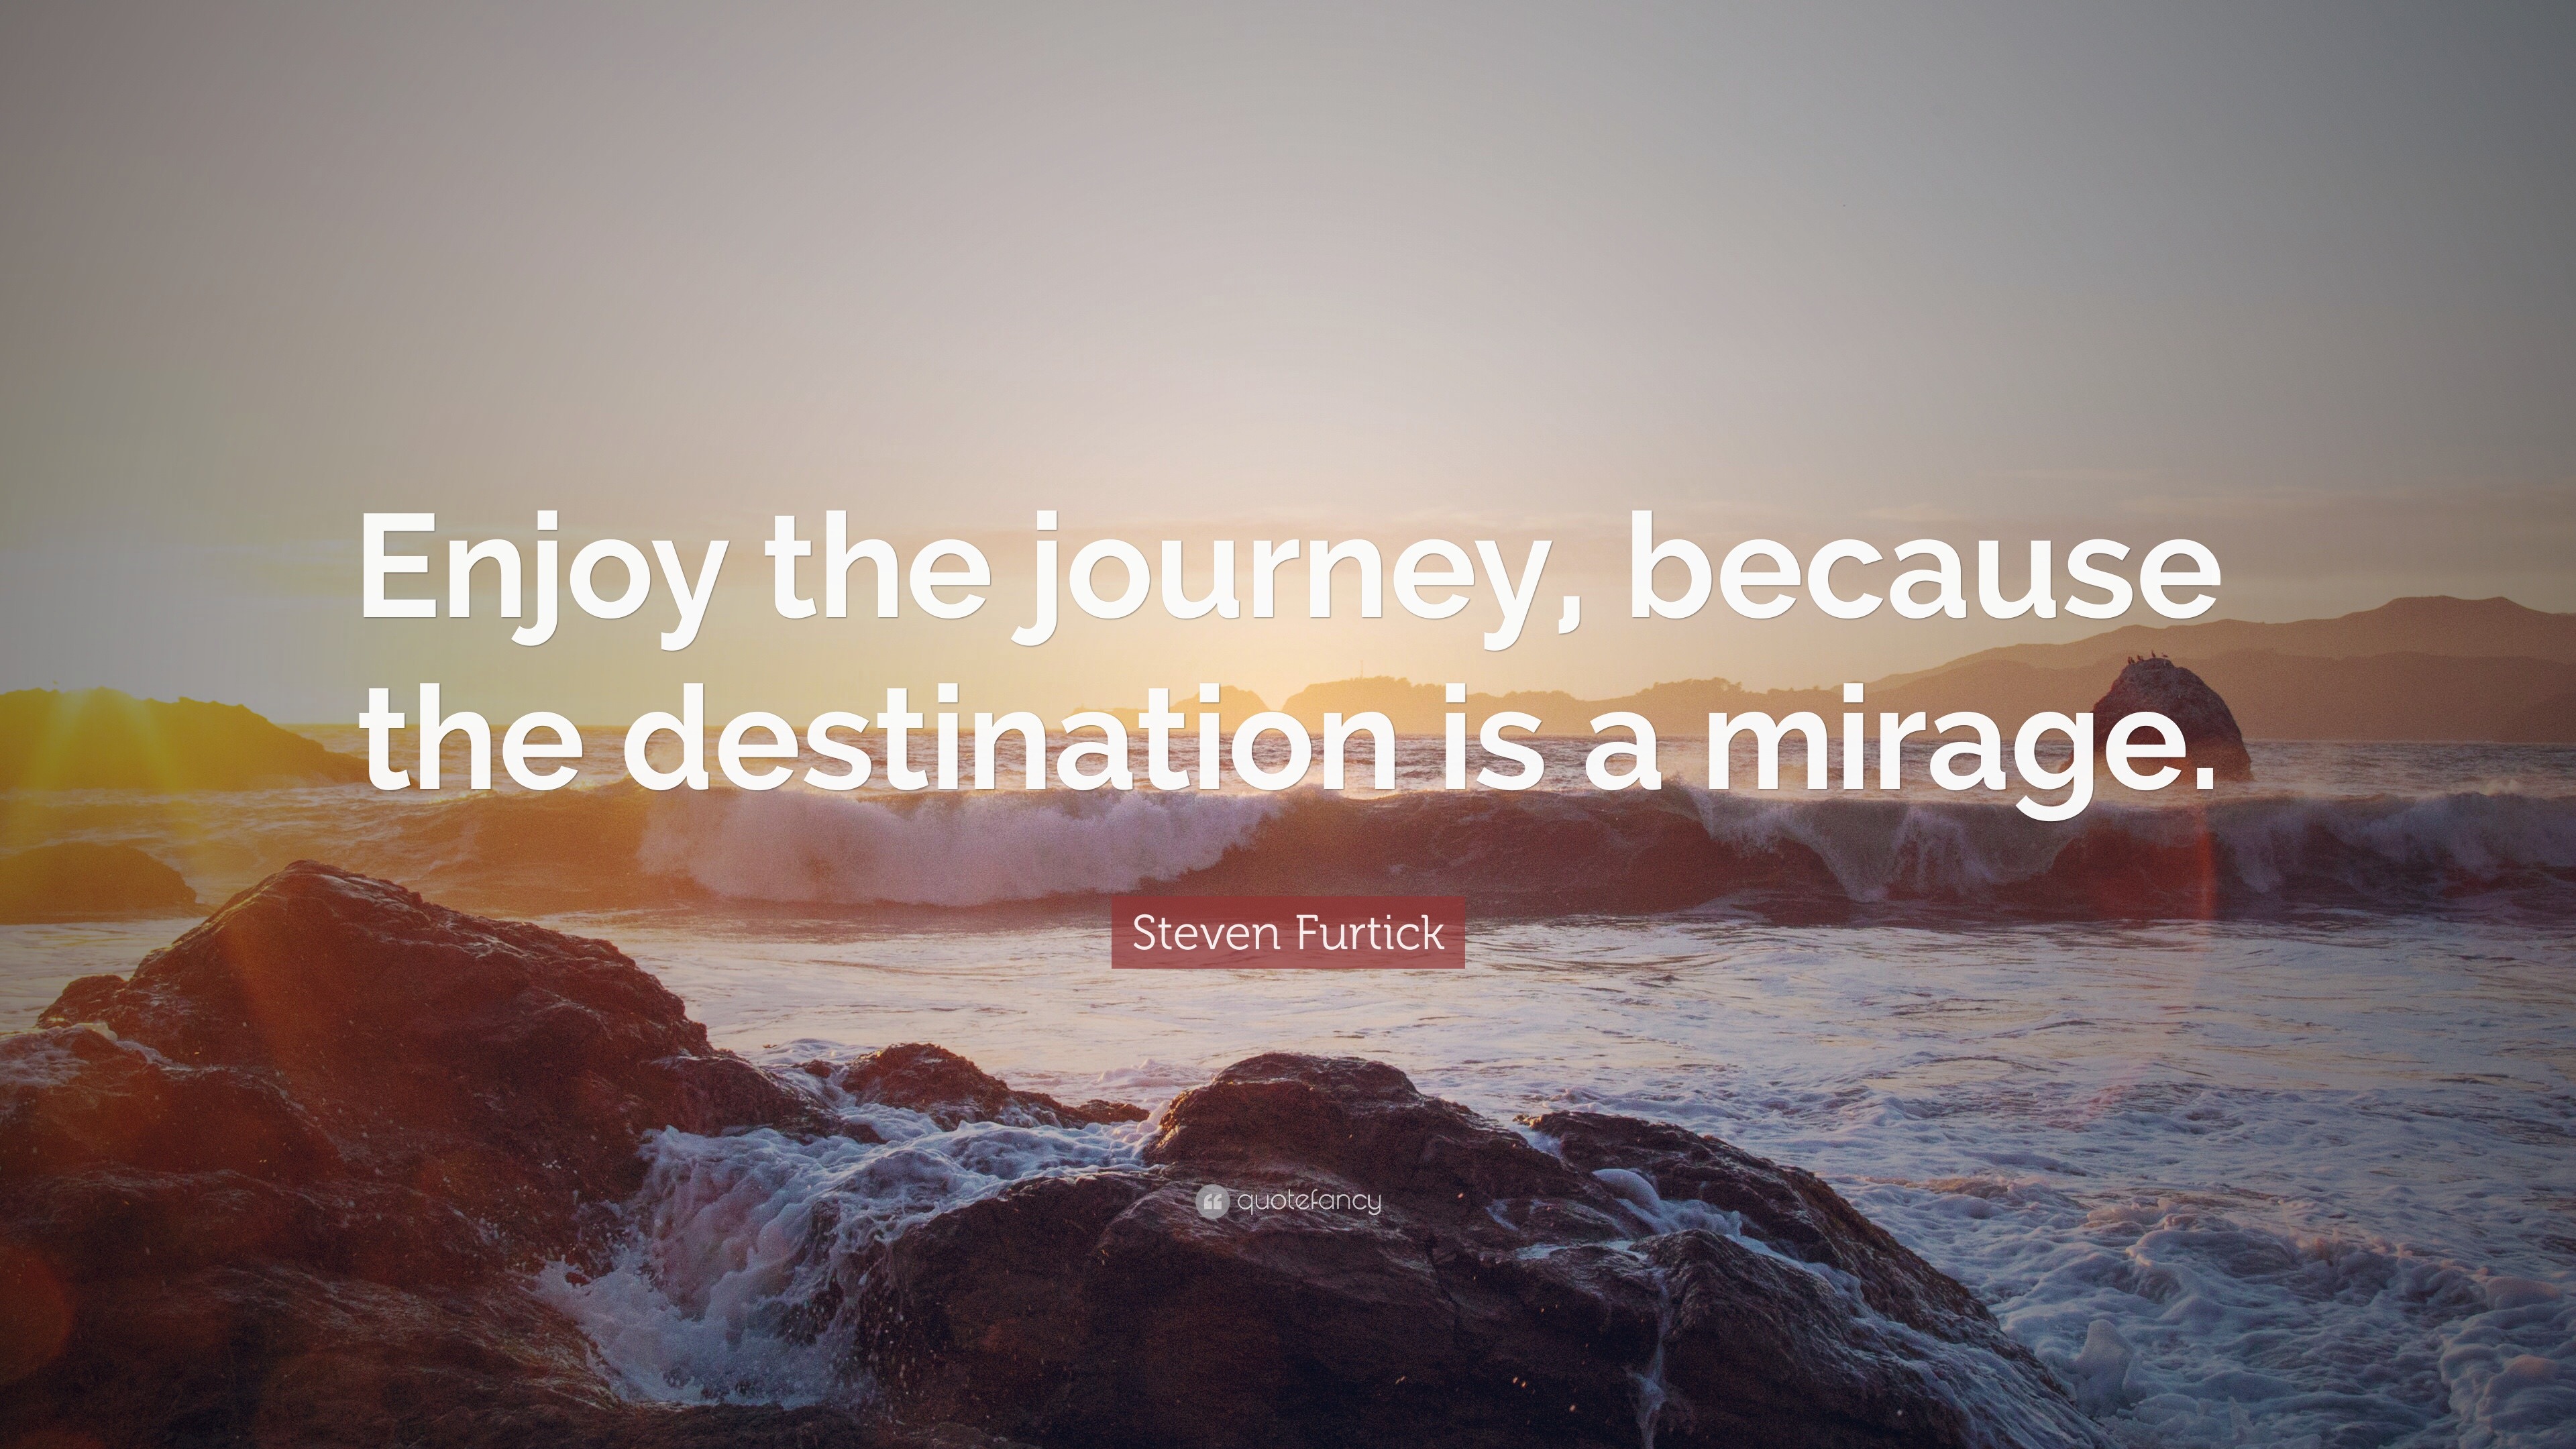 Enjoy the journey, the destination will come.